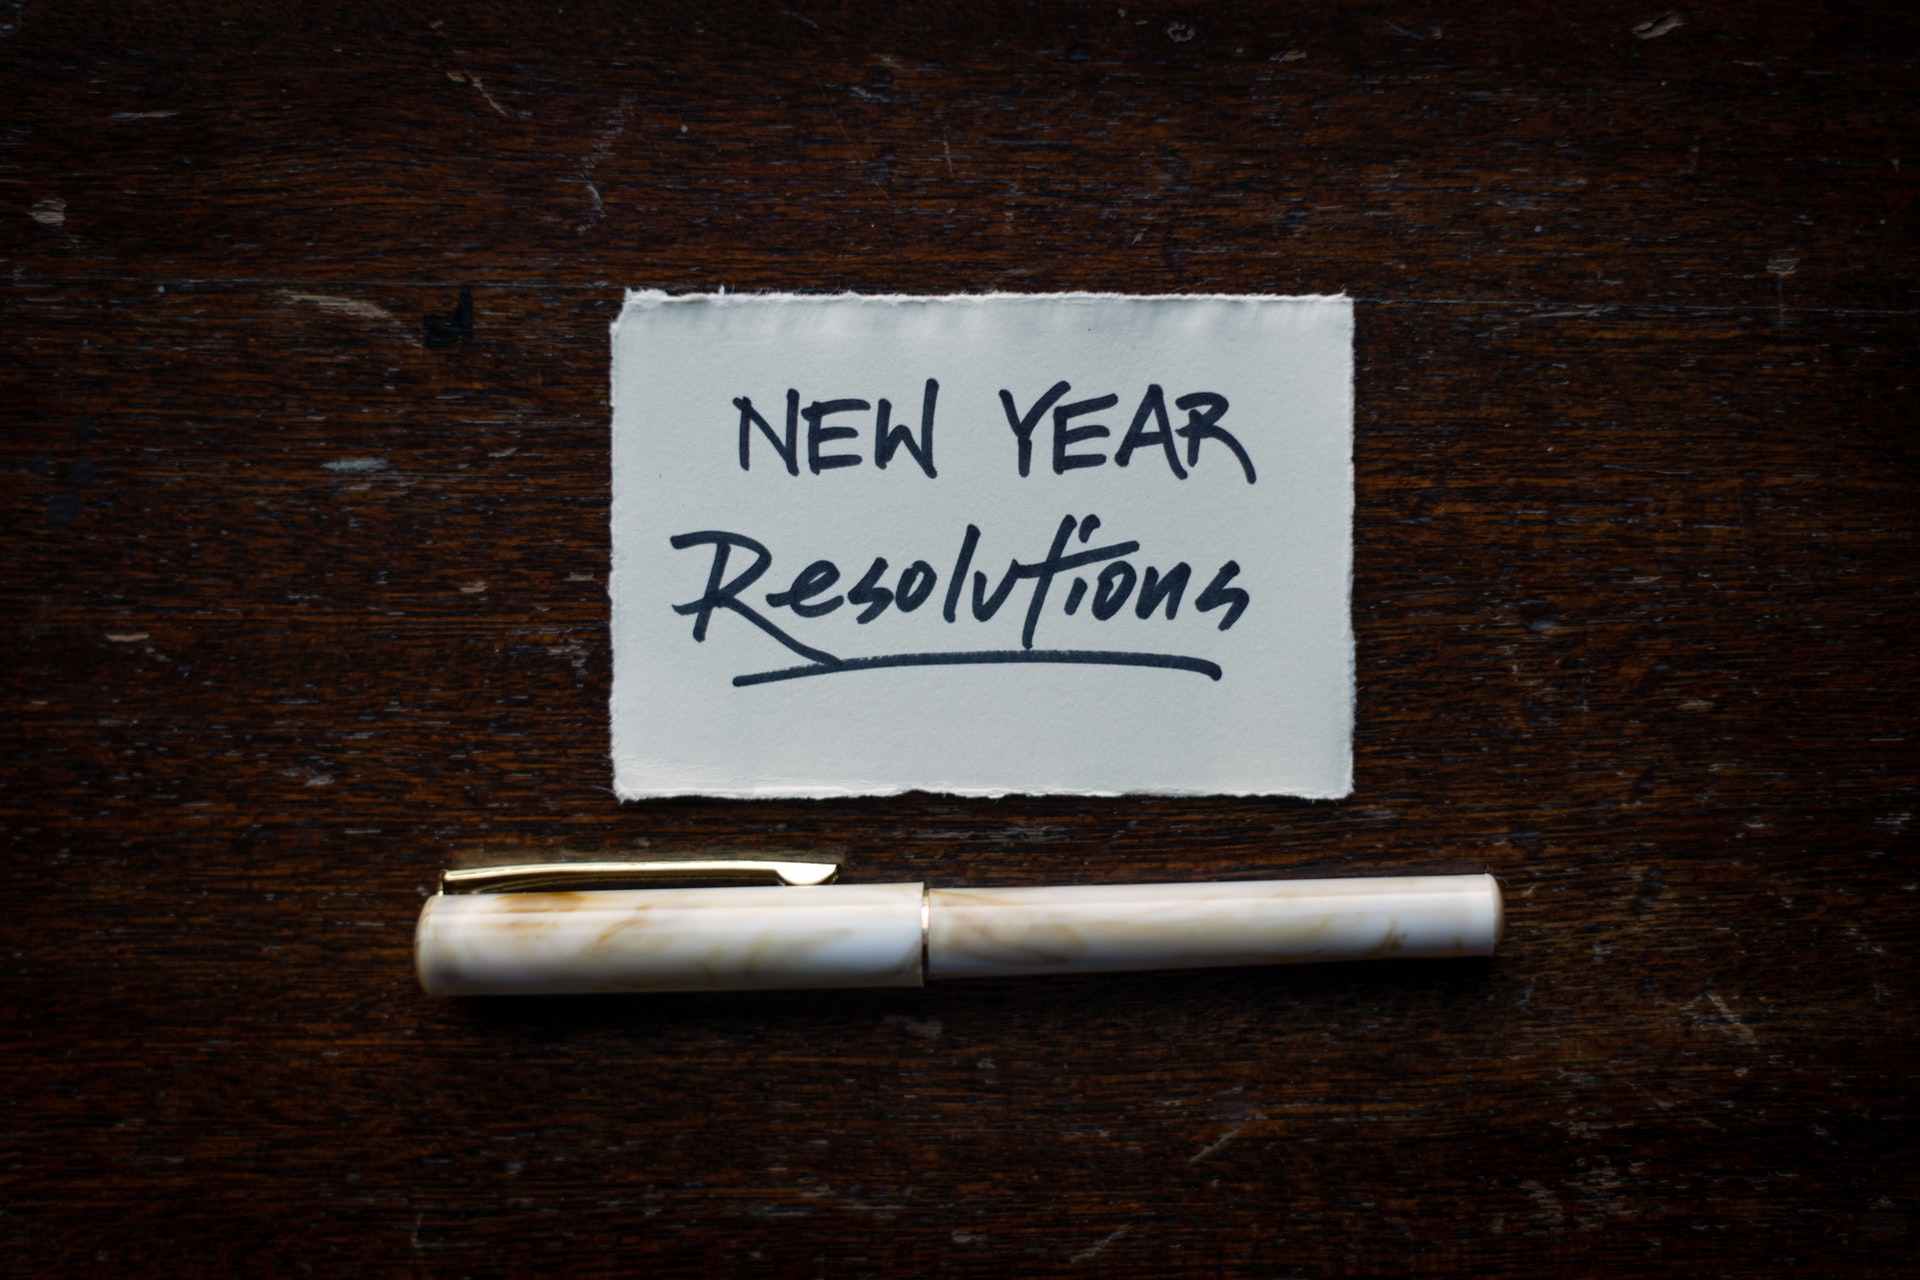 4 New Year’s resolutions for a healthier environment in 2022